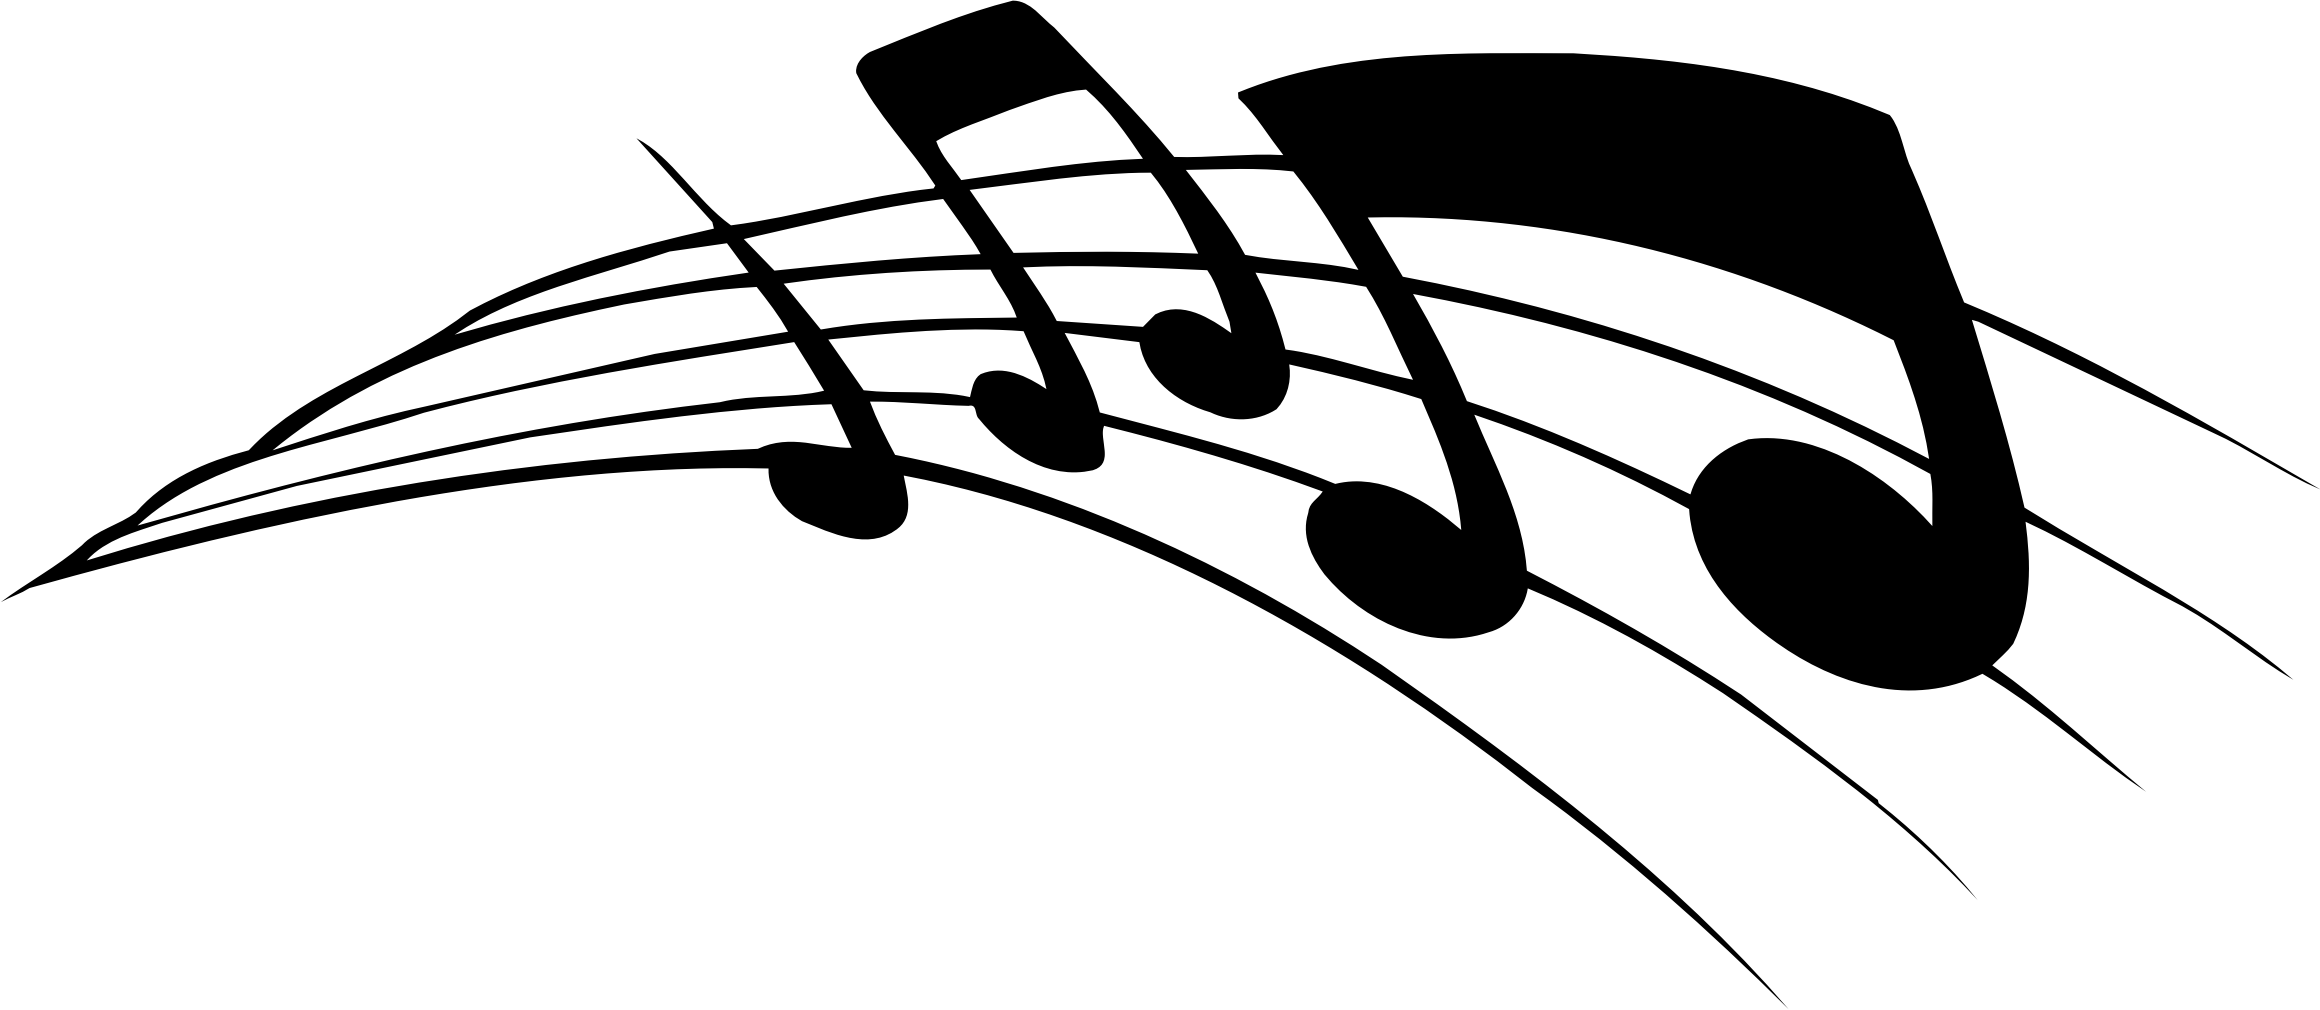 Music notes PNG images 